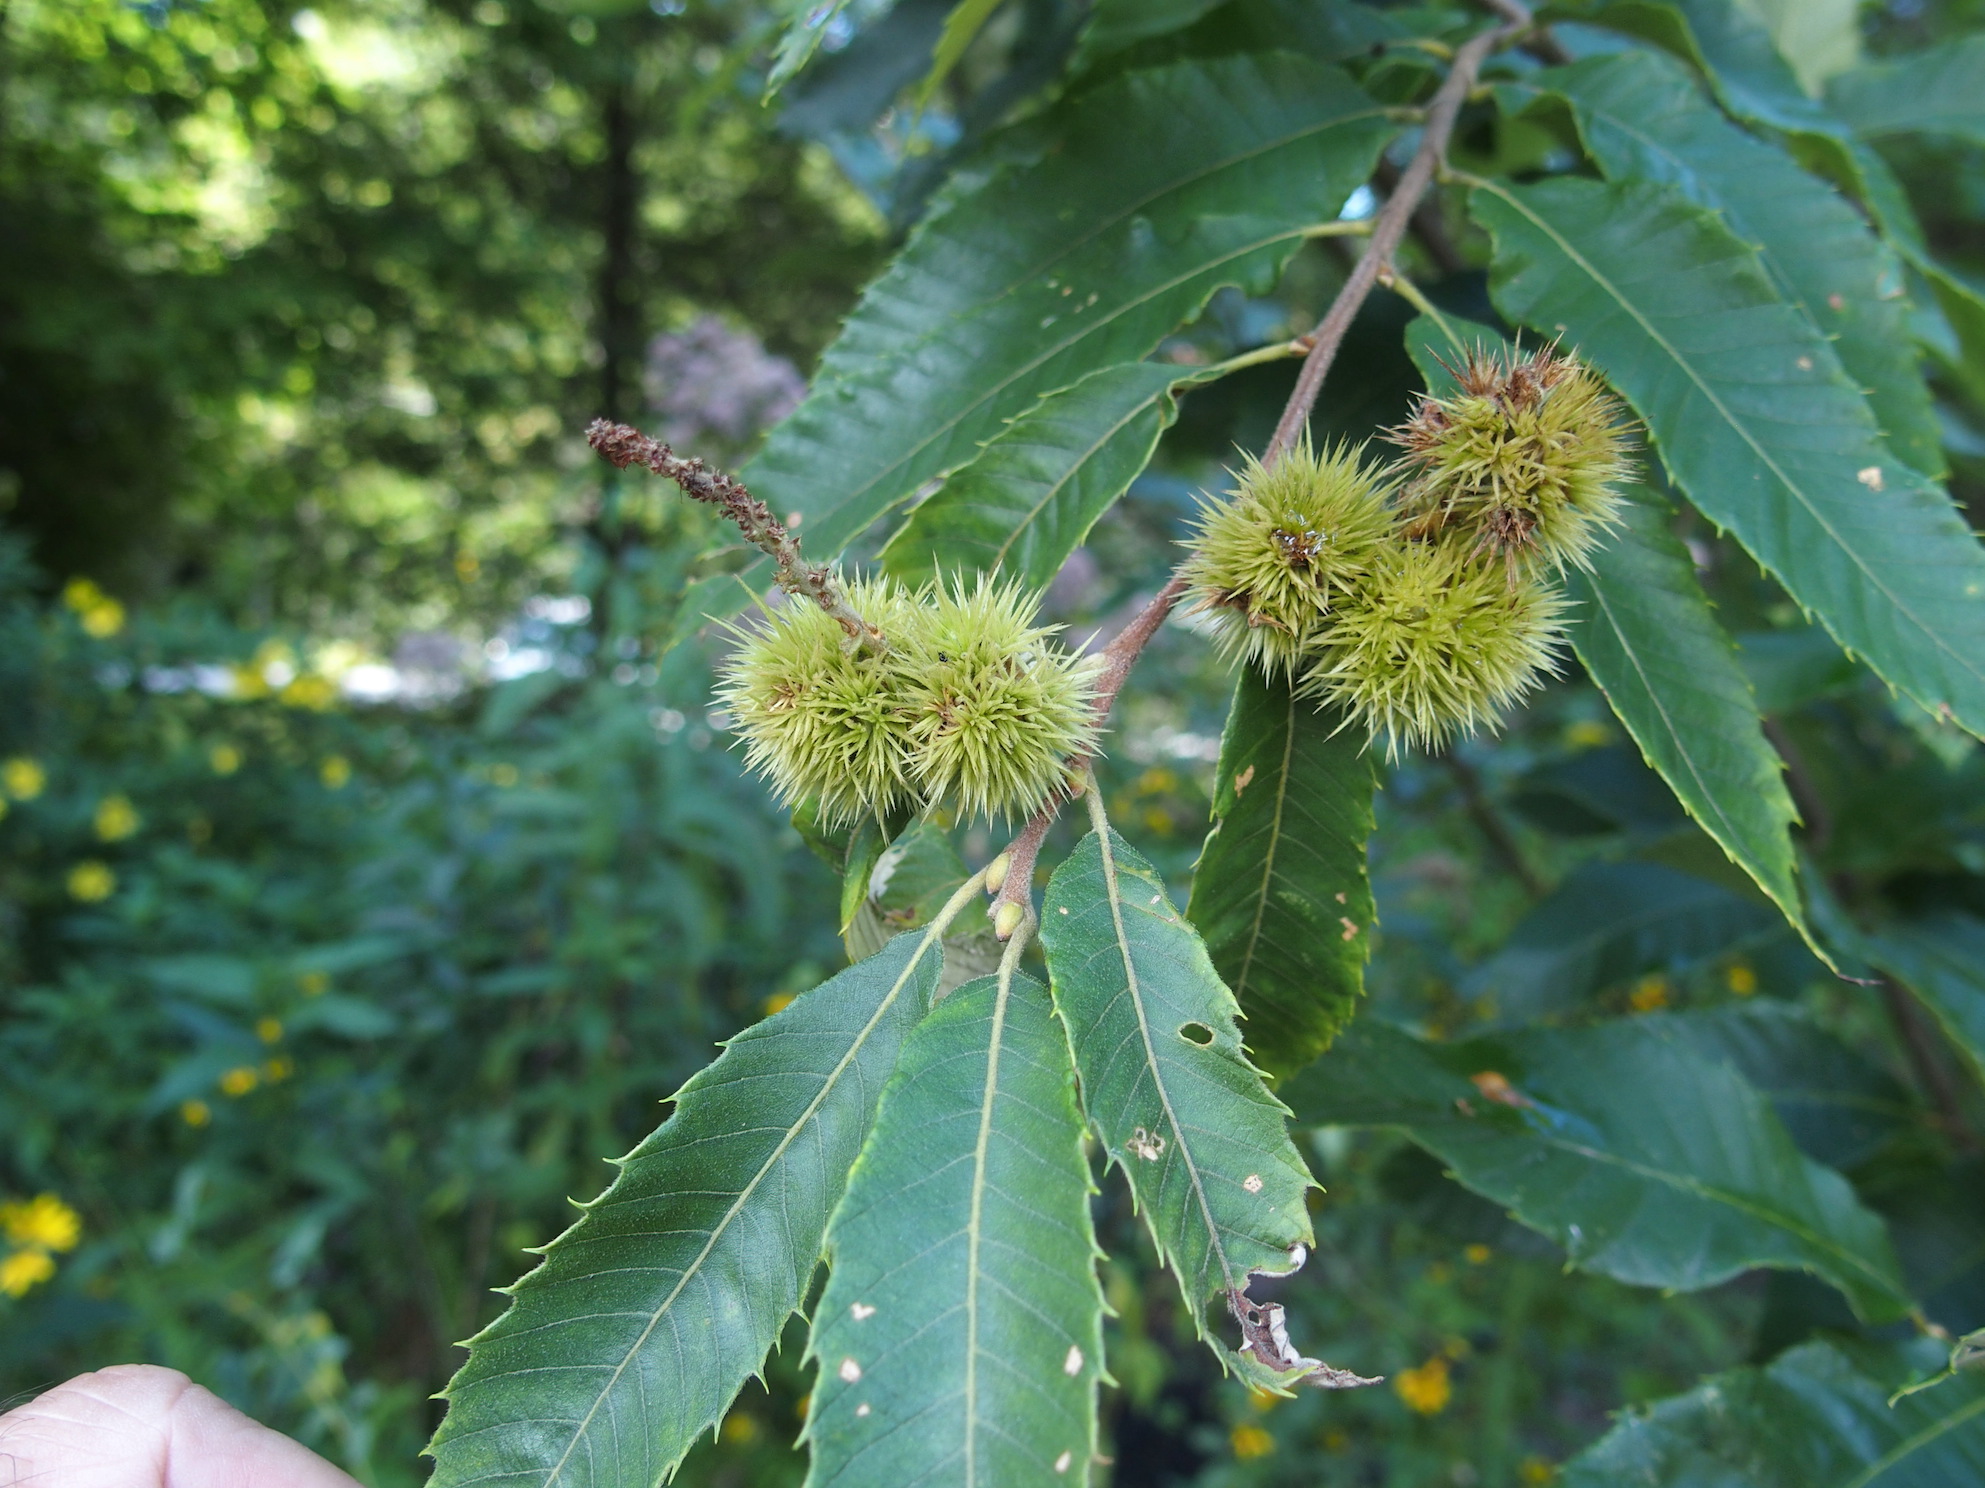 The Scientific Name is Castanea pumila. You will likely hear them called Common Chinquapin, Allegheny Chinquapin, Chinkapin, Dwarf Chinquapin. This picture shows the Leaves shorter, teeth shallower, and leaves hairy on the undersides as compared to American Chestnut. of Castanea pumila